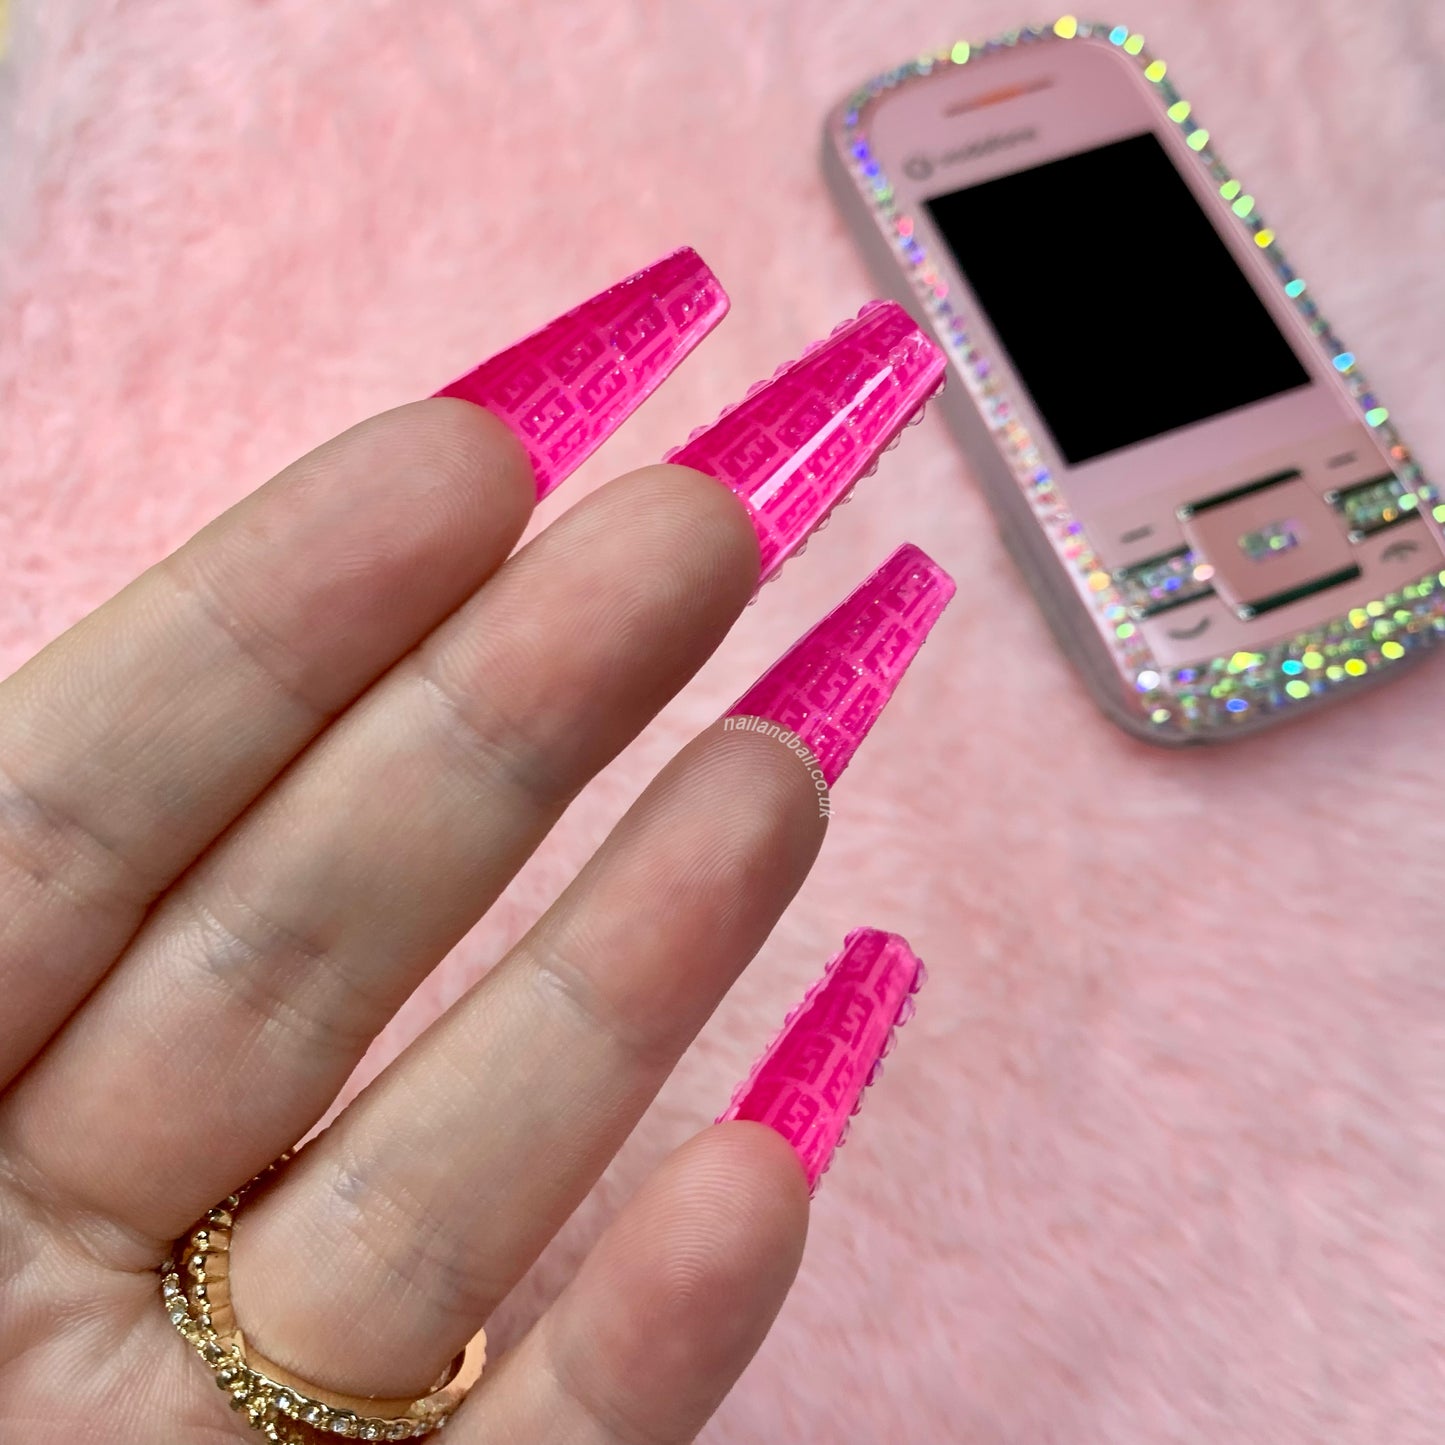 Be pretty in pink and ready to take on the world with Barbie Tingz! Get a hit of fabulous with these luxury Pink Friday press on nails--perfect for any fashionista! Show off your wild side with Nicki Minaj's designer designs and sparkle like a diamond!